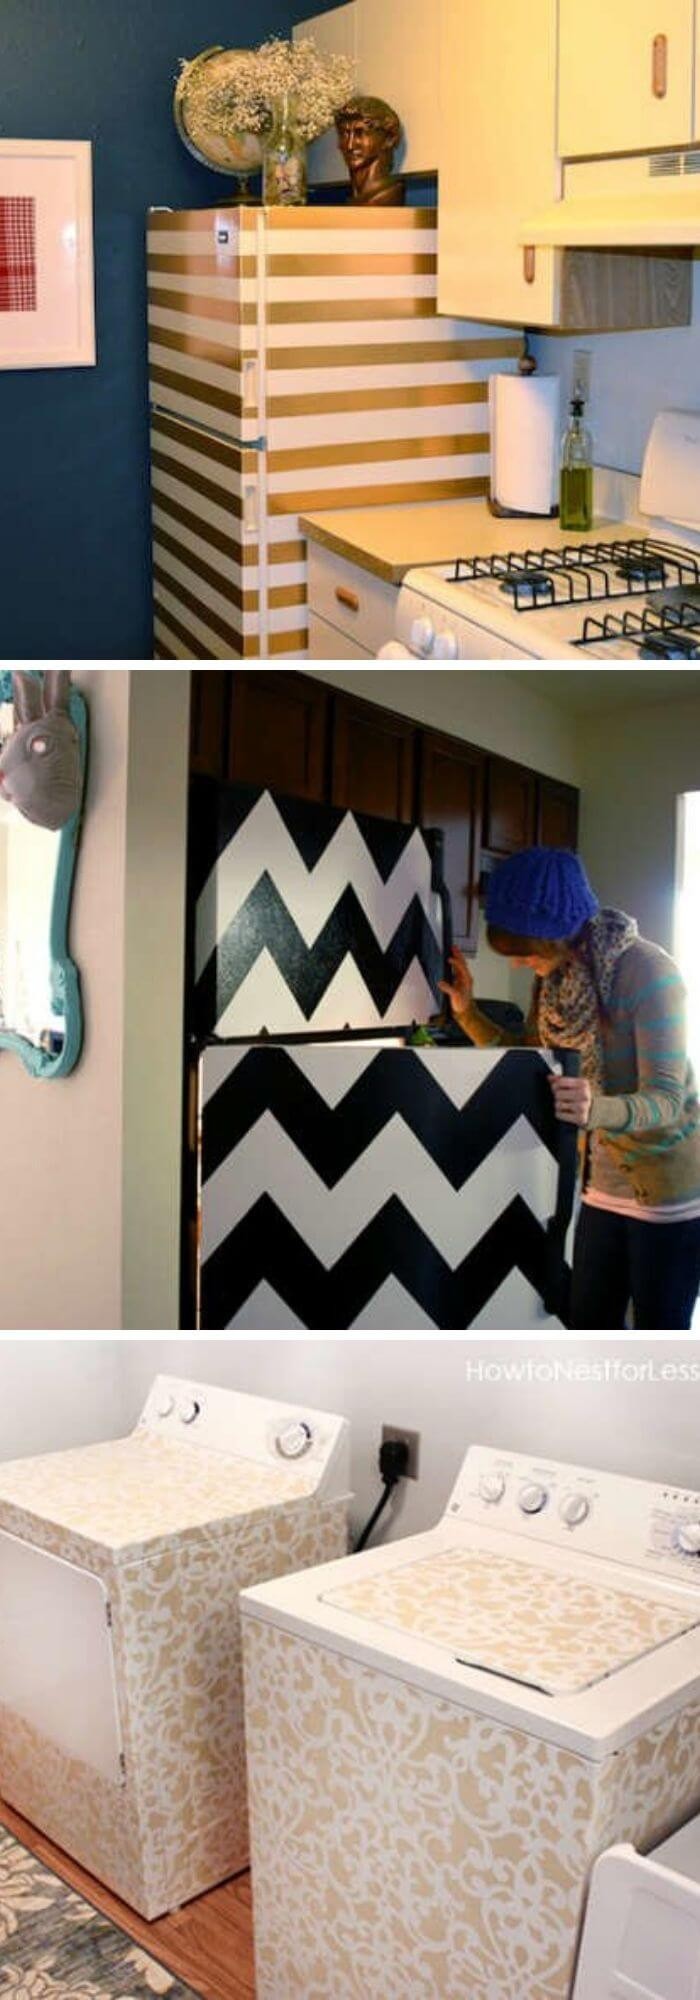 20+ Cool And Easy Spray Paint Project Ideas Will Transform Your Furnitures